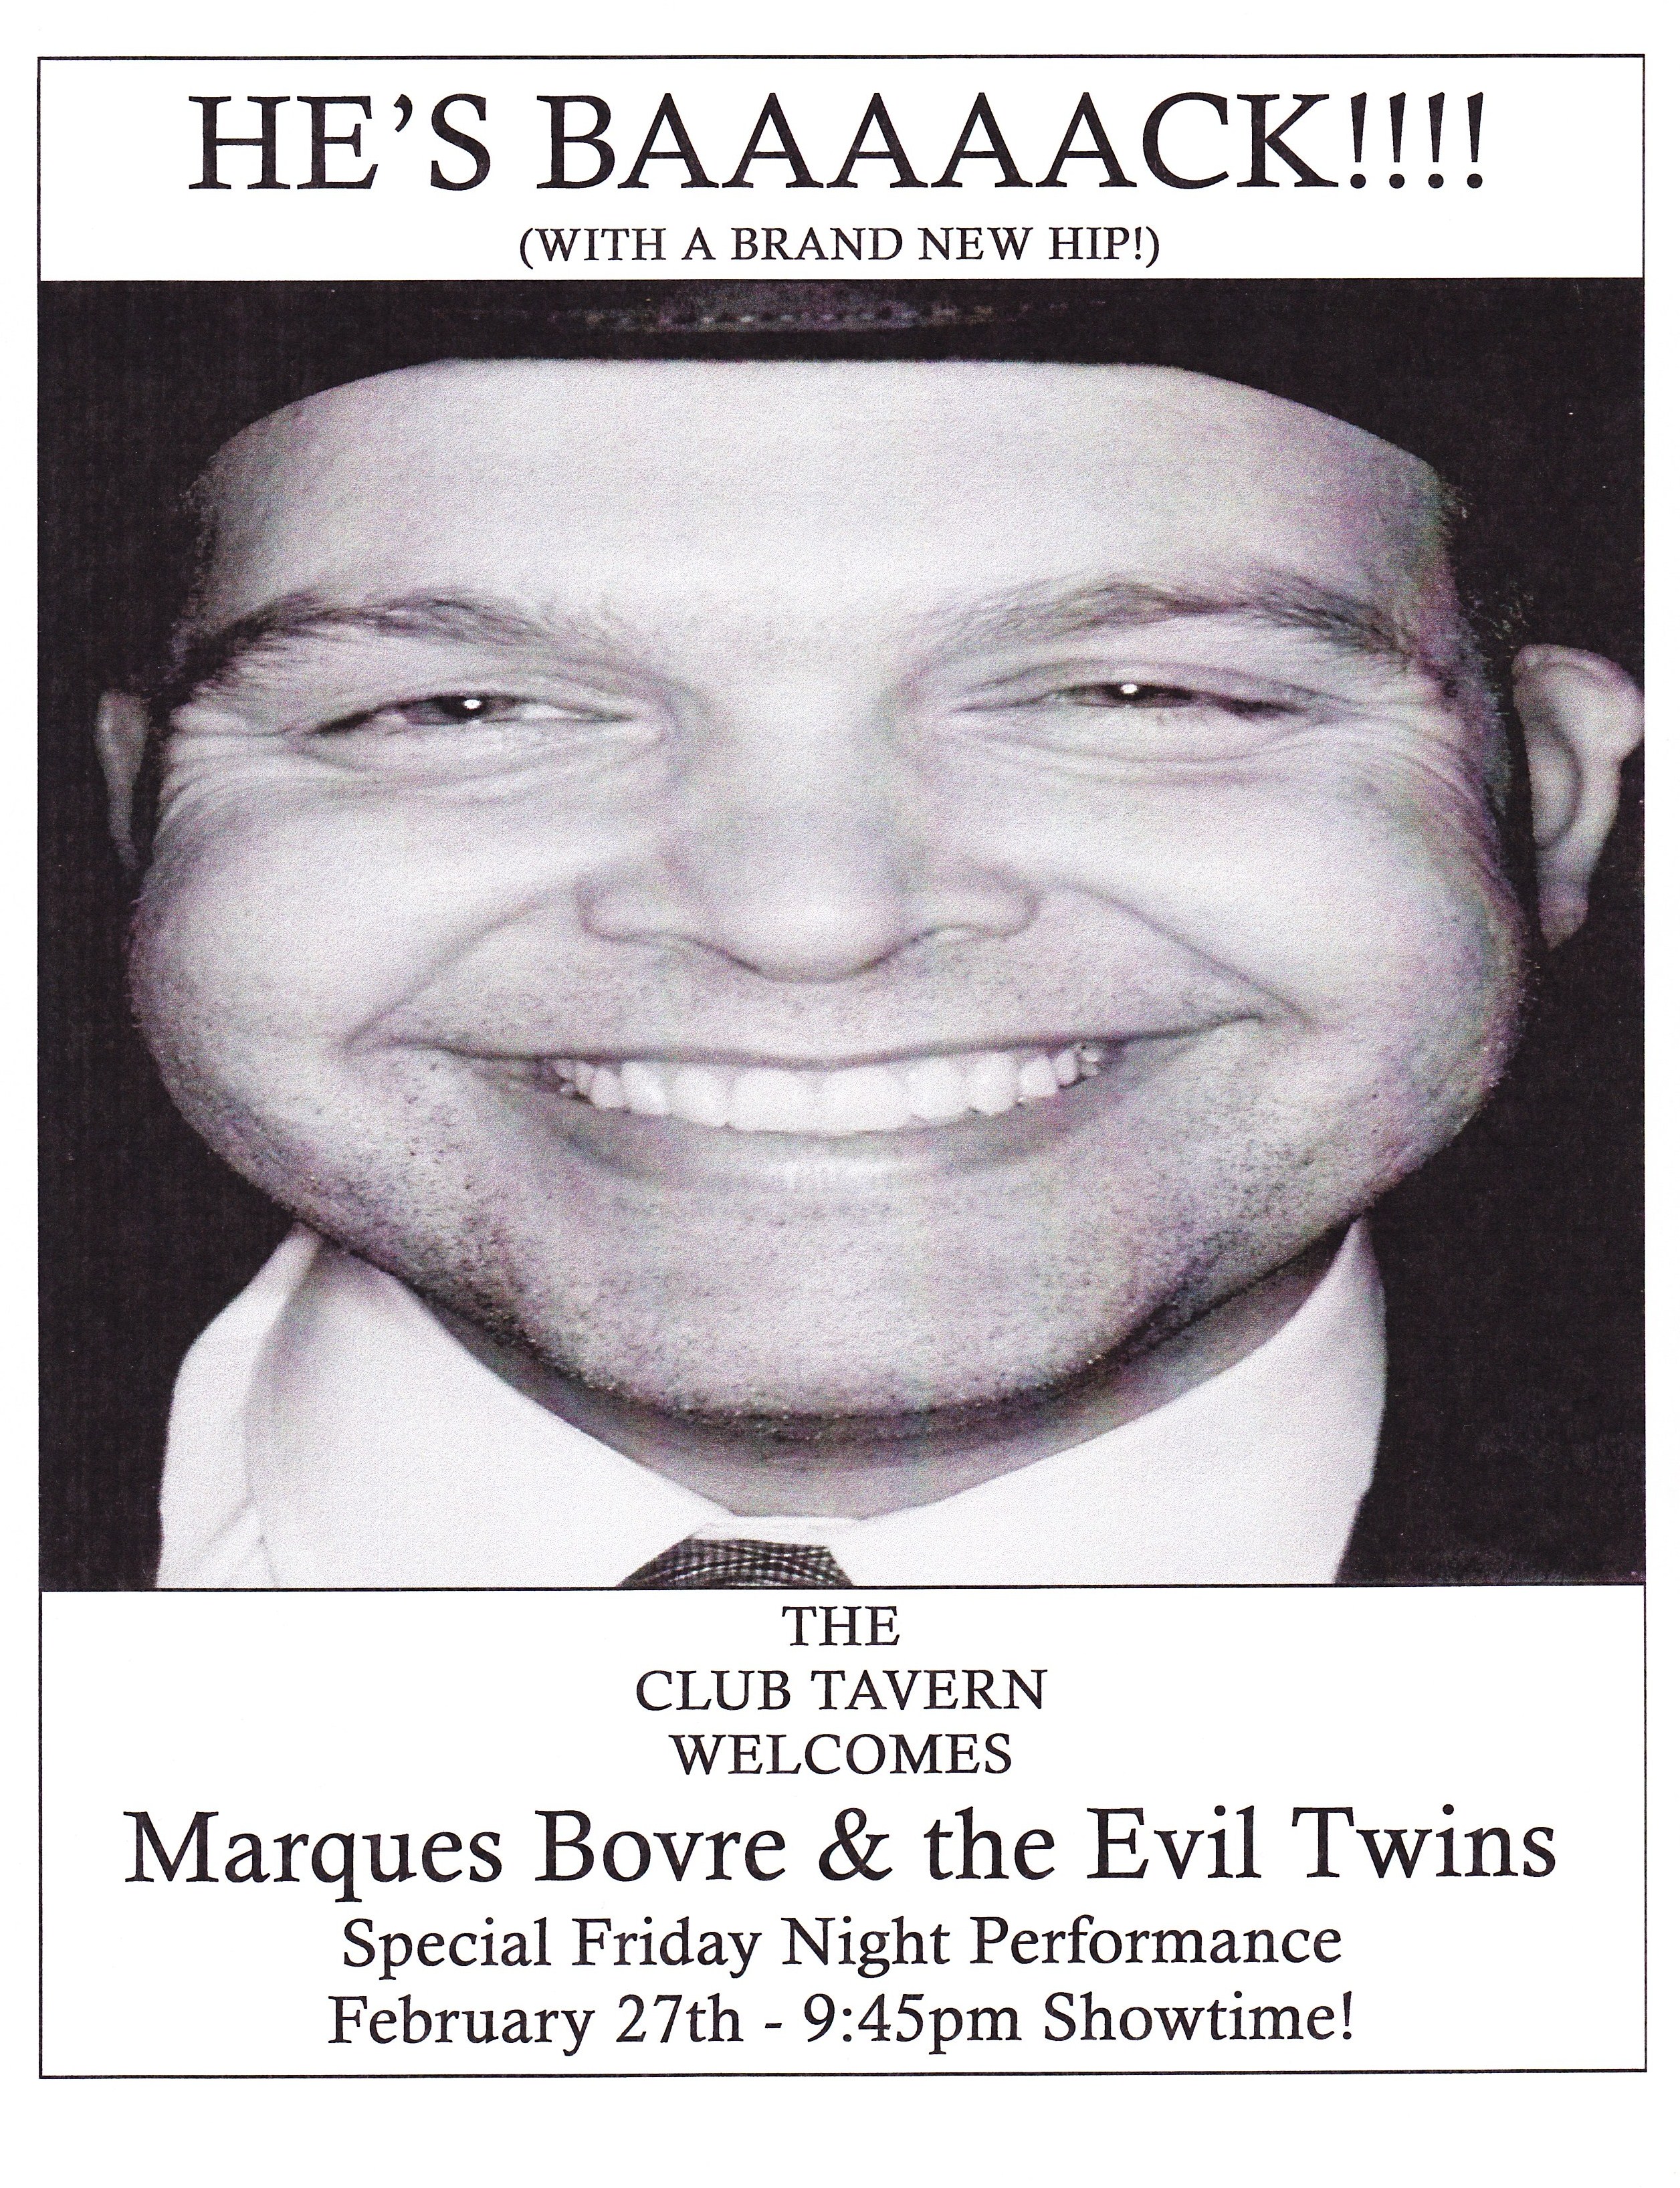 Marques Bovre and the Evil Twins, February 27, 1998